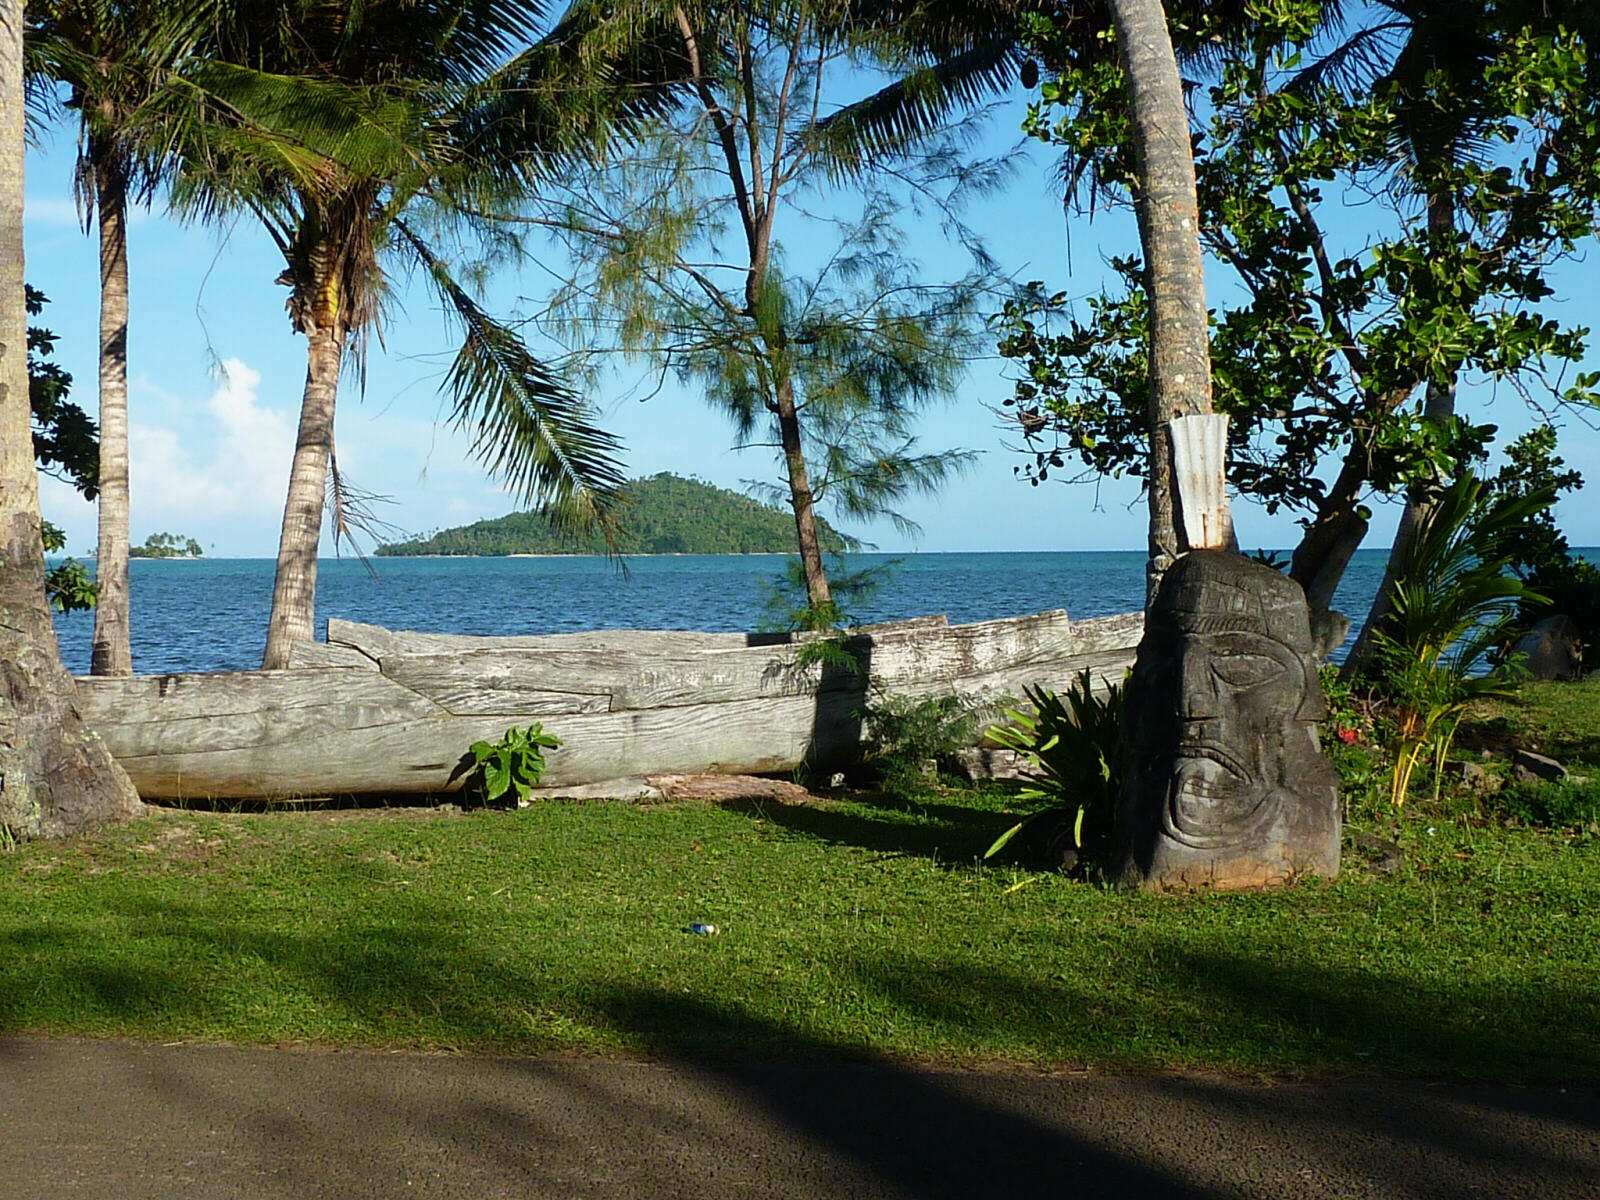 Wooden canoe and statue on the seafront on Wallis island